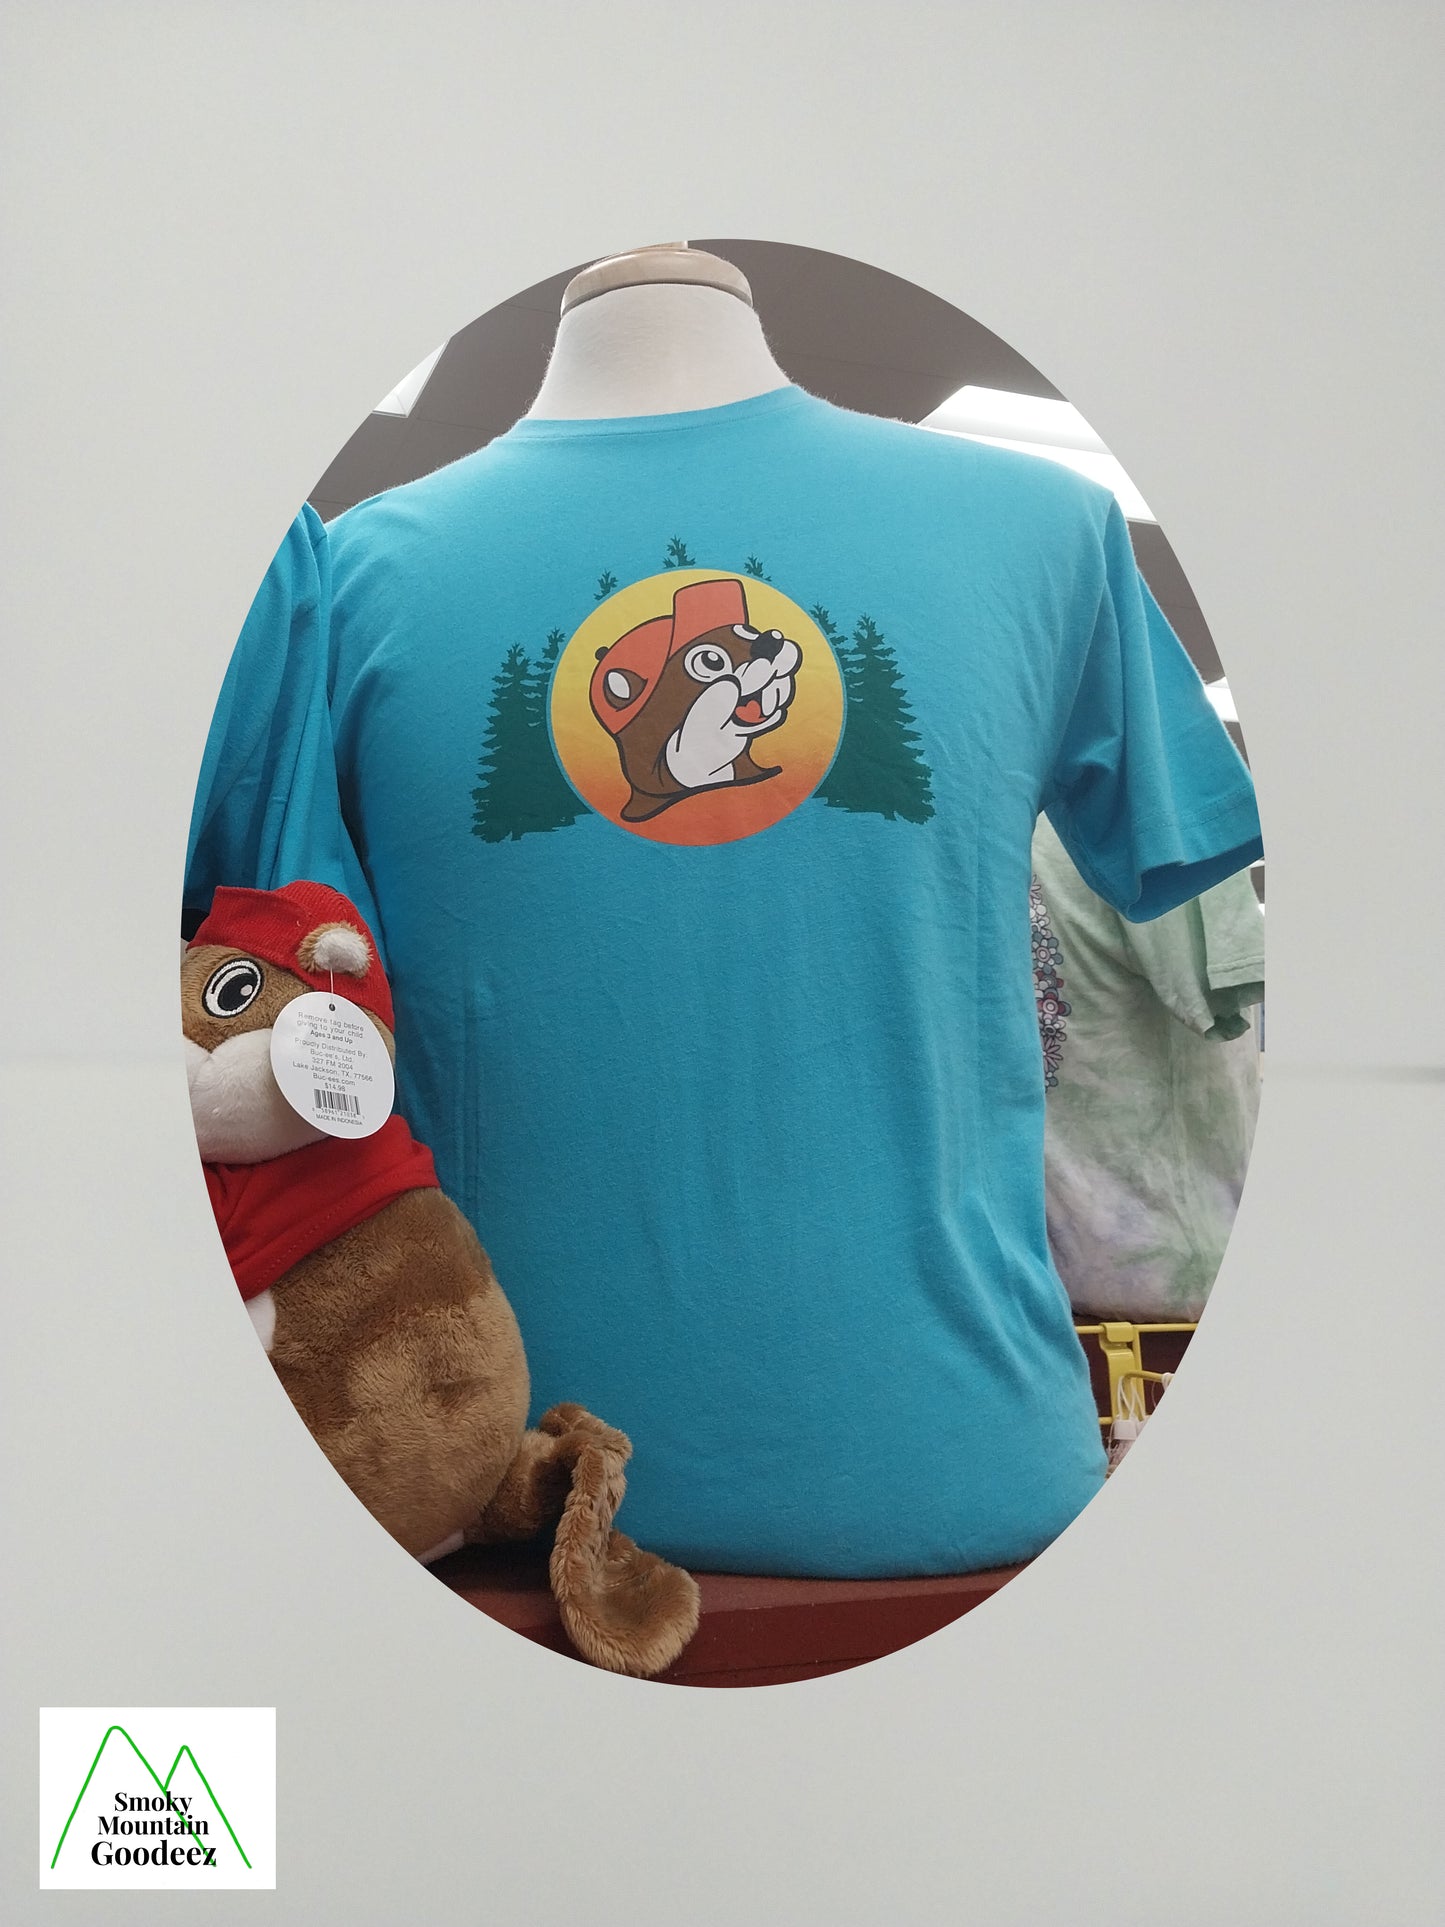 Buc-ee's "It's All Good In the Woods" T-shirt